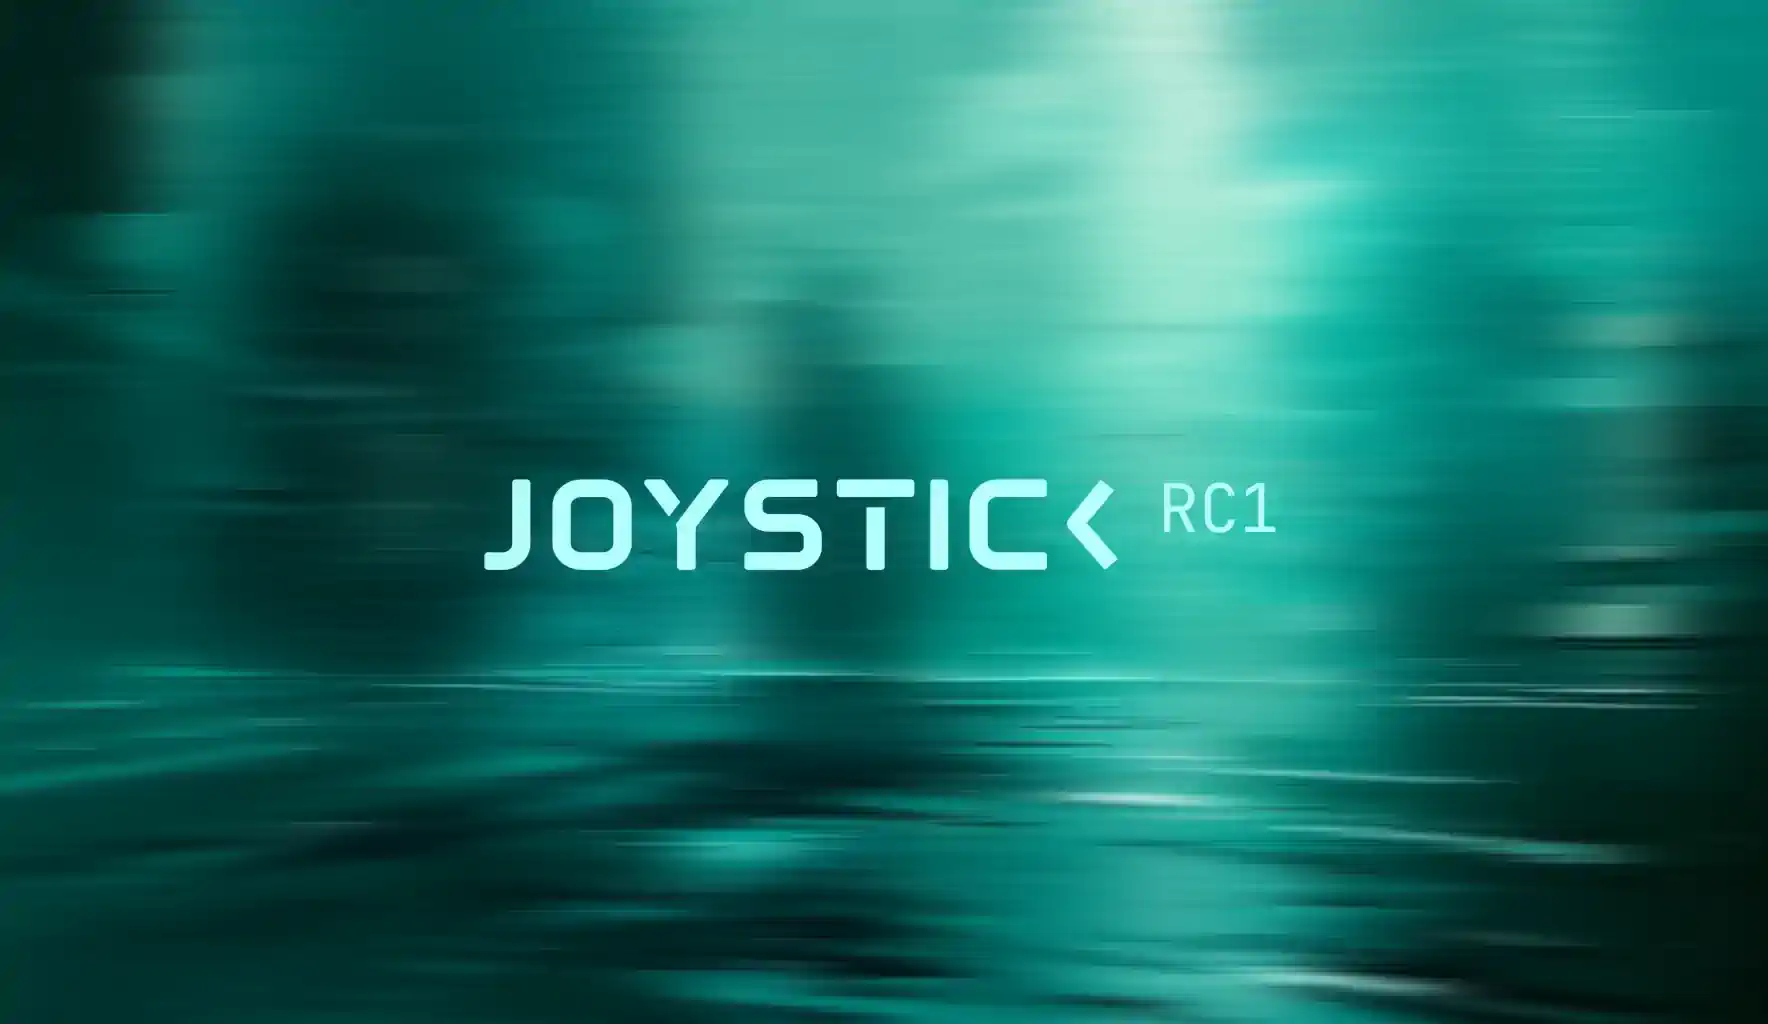 Launch: Joystick RC1, Push Private Beta, and Mod Pre-Release